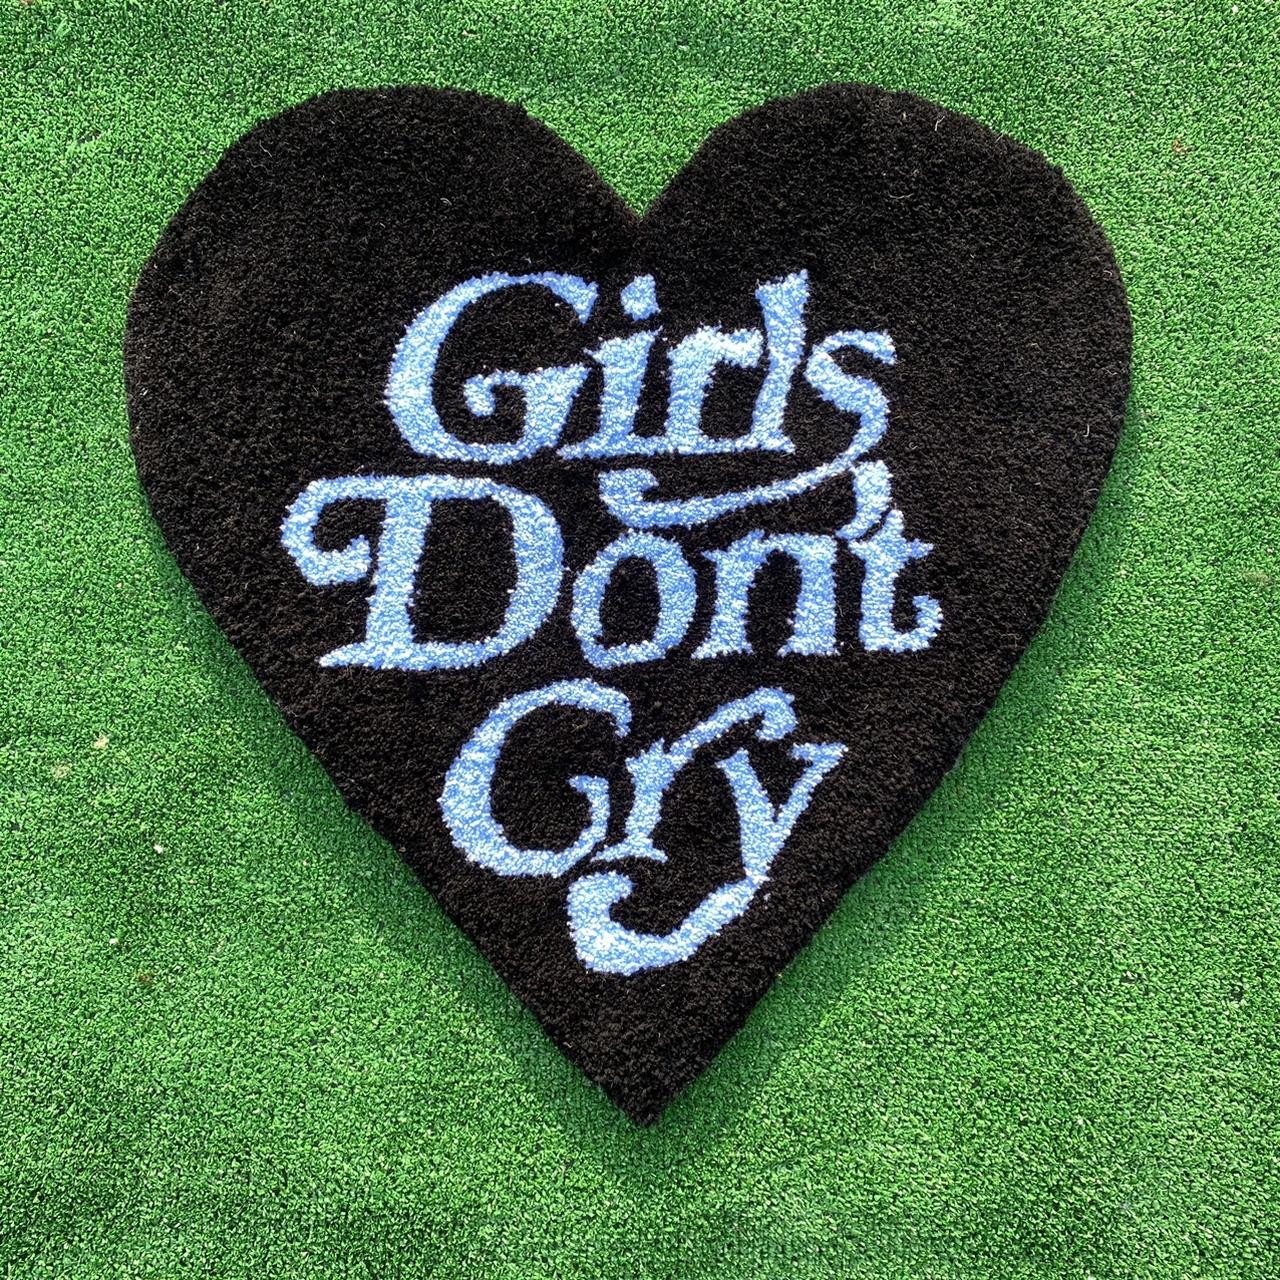 Updated Girls don’t cry rug, the letters are much...